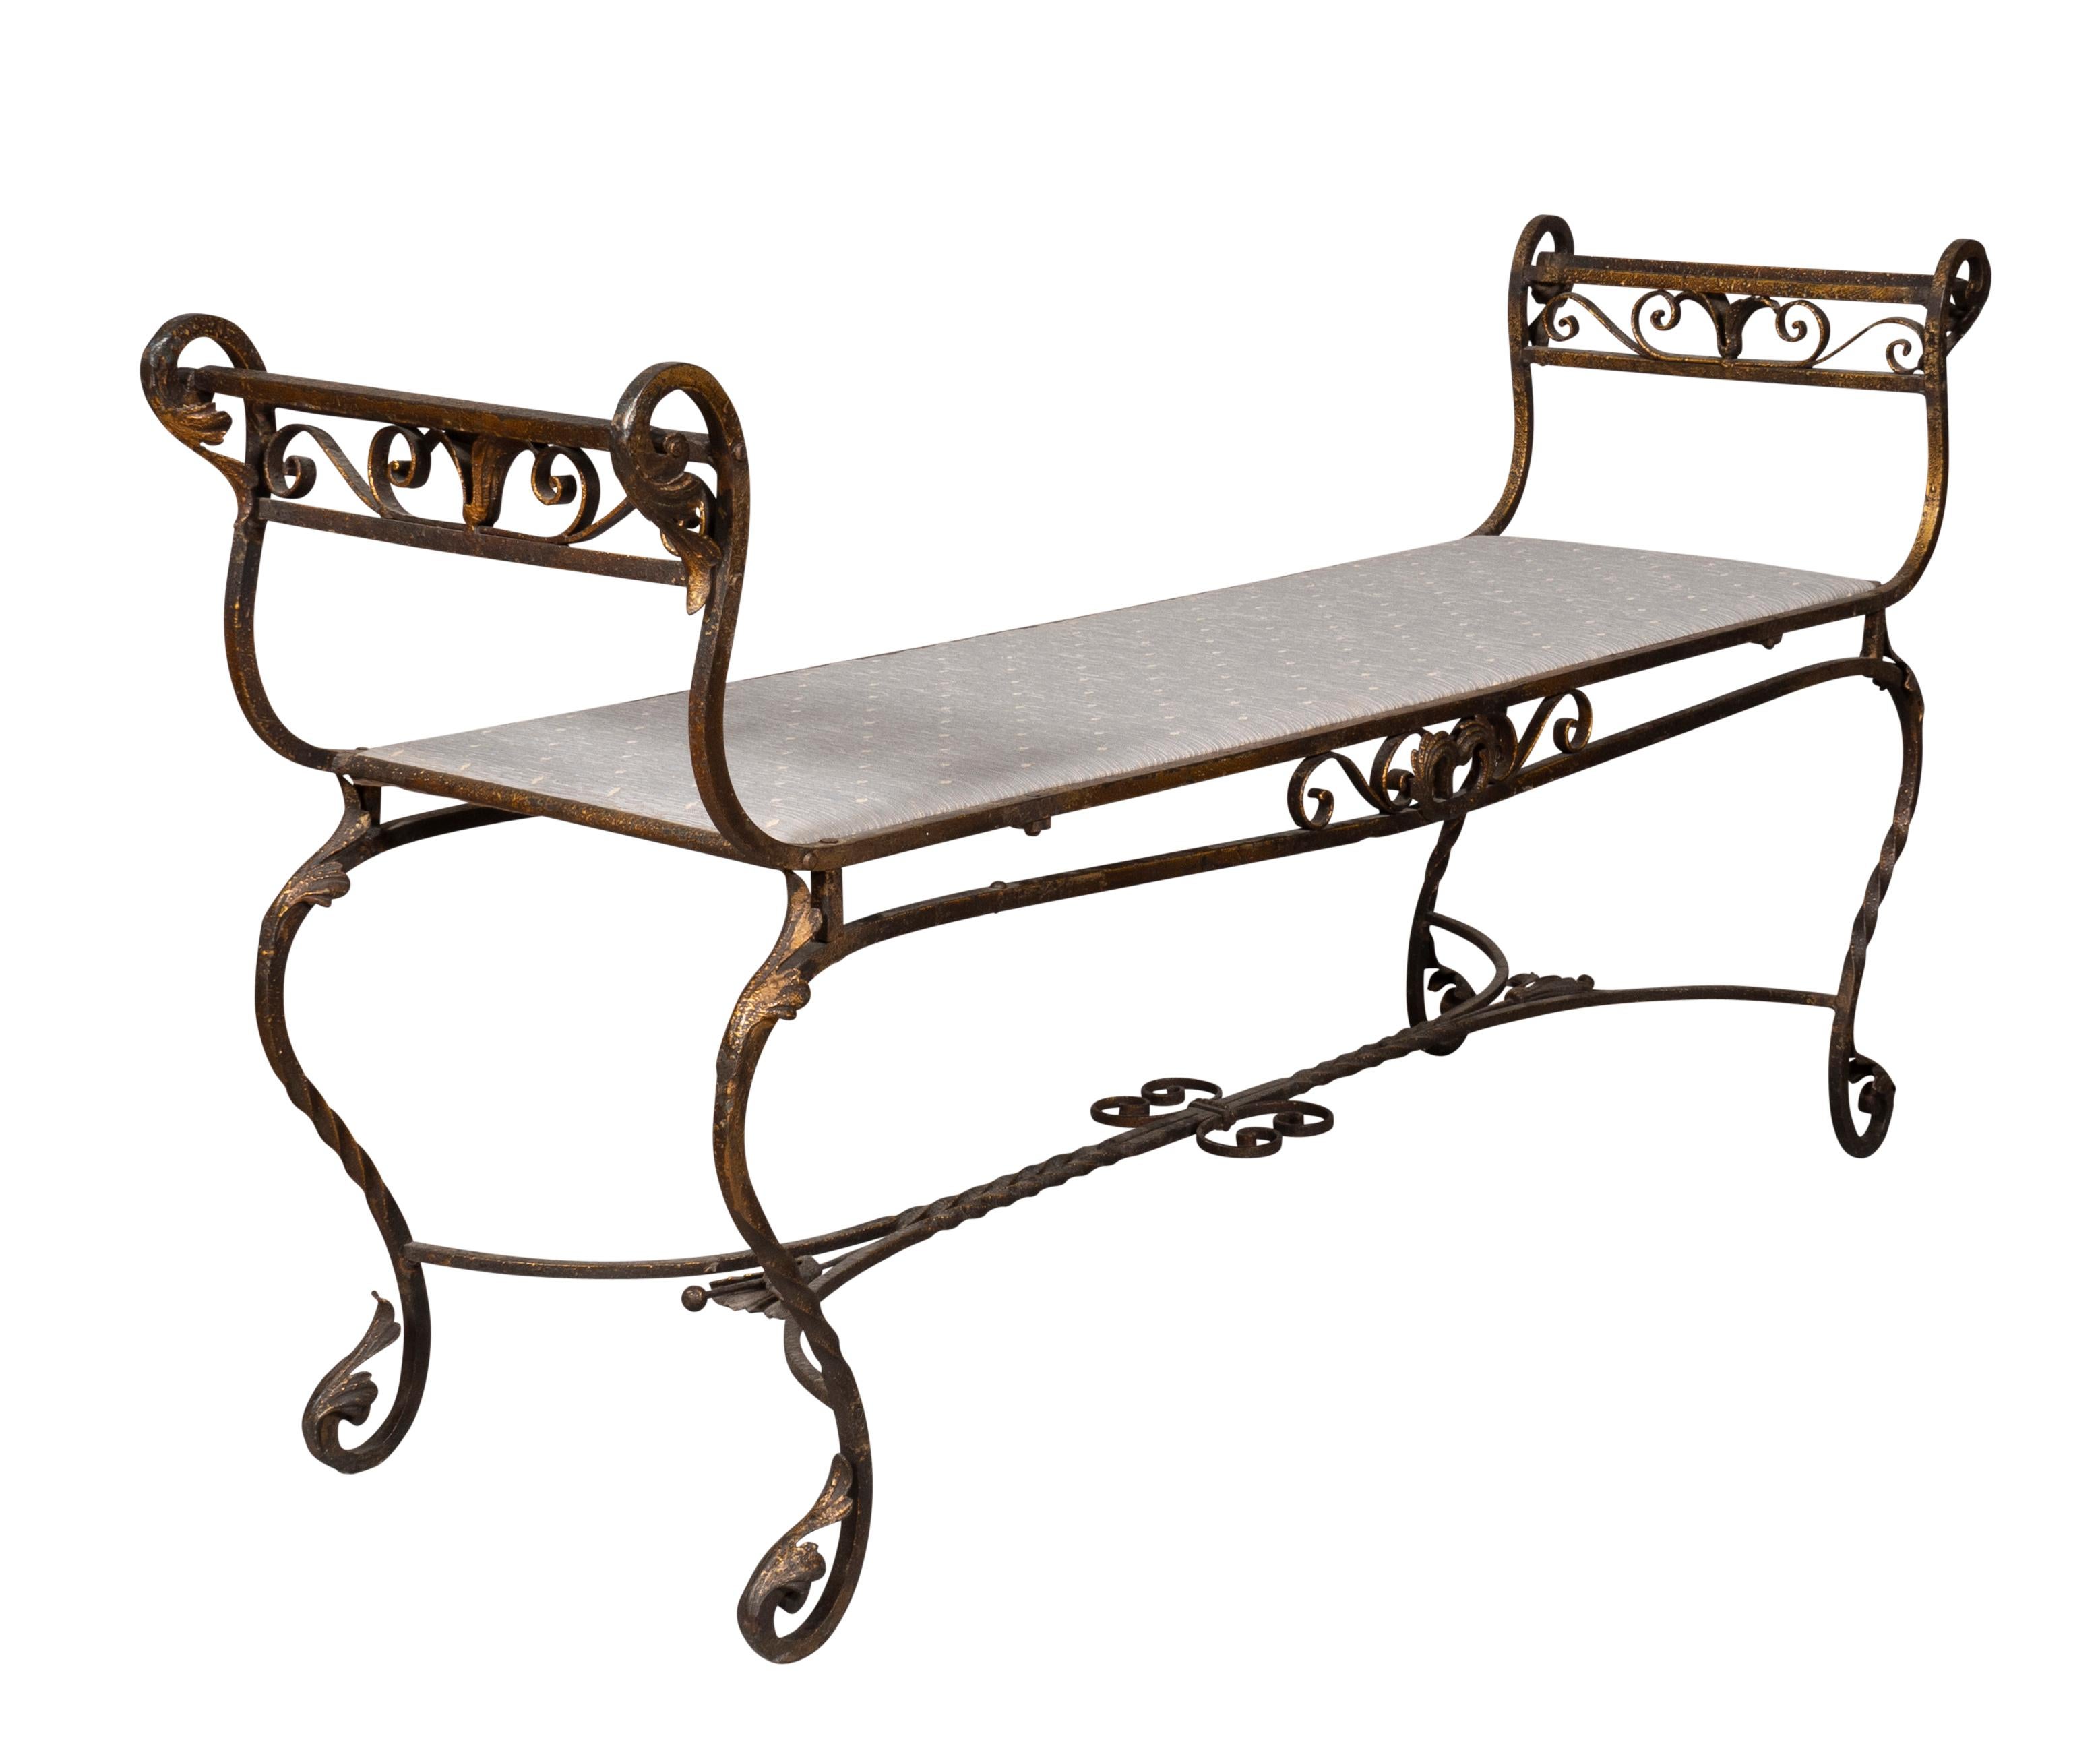 American Wrought Iron Bench In Good Condition For Sale In Essex, MA